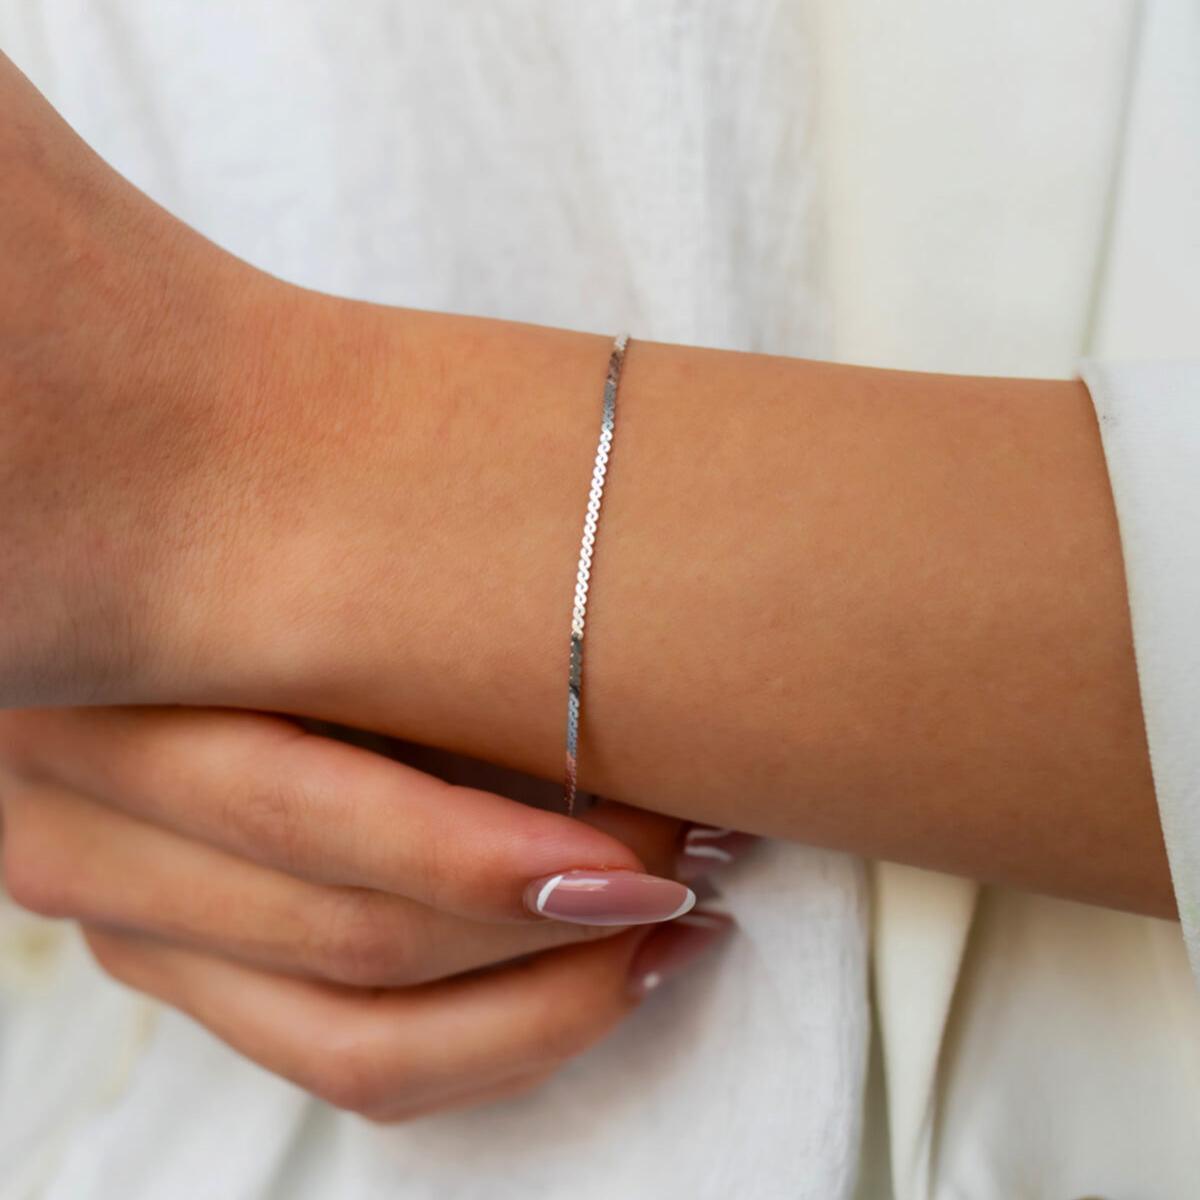 Foxtail Chain Silver Bracelet •  Christmas Gift For Wife - Trending Silver Gifts